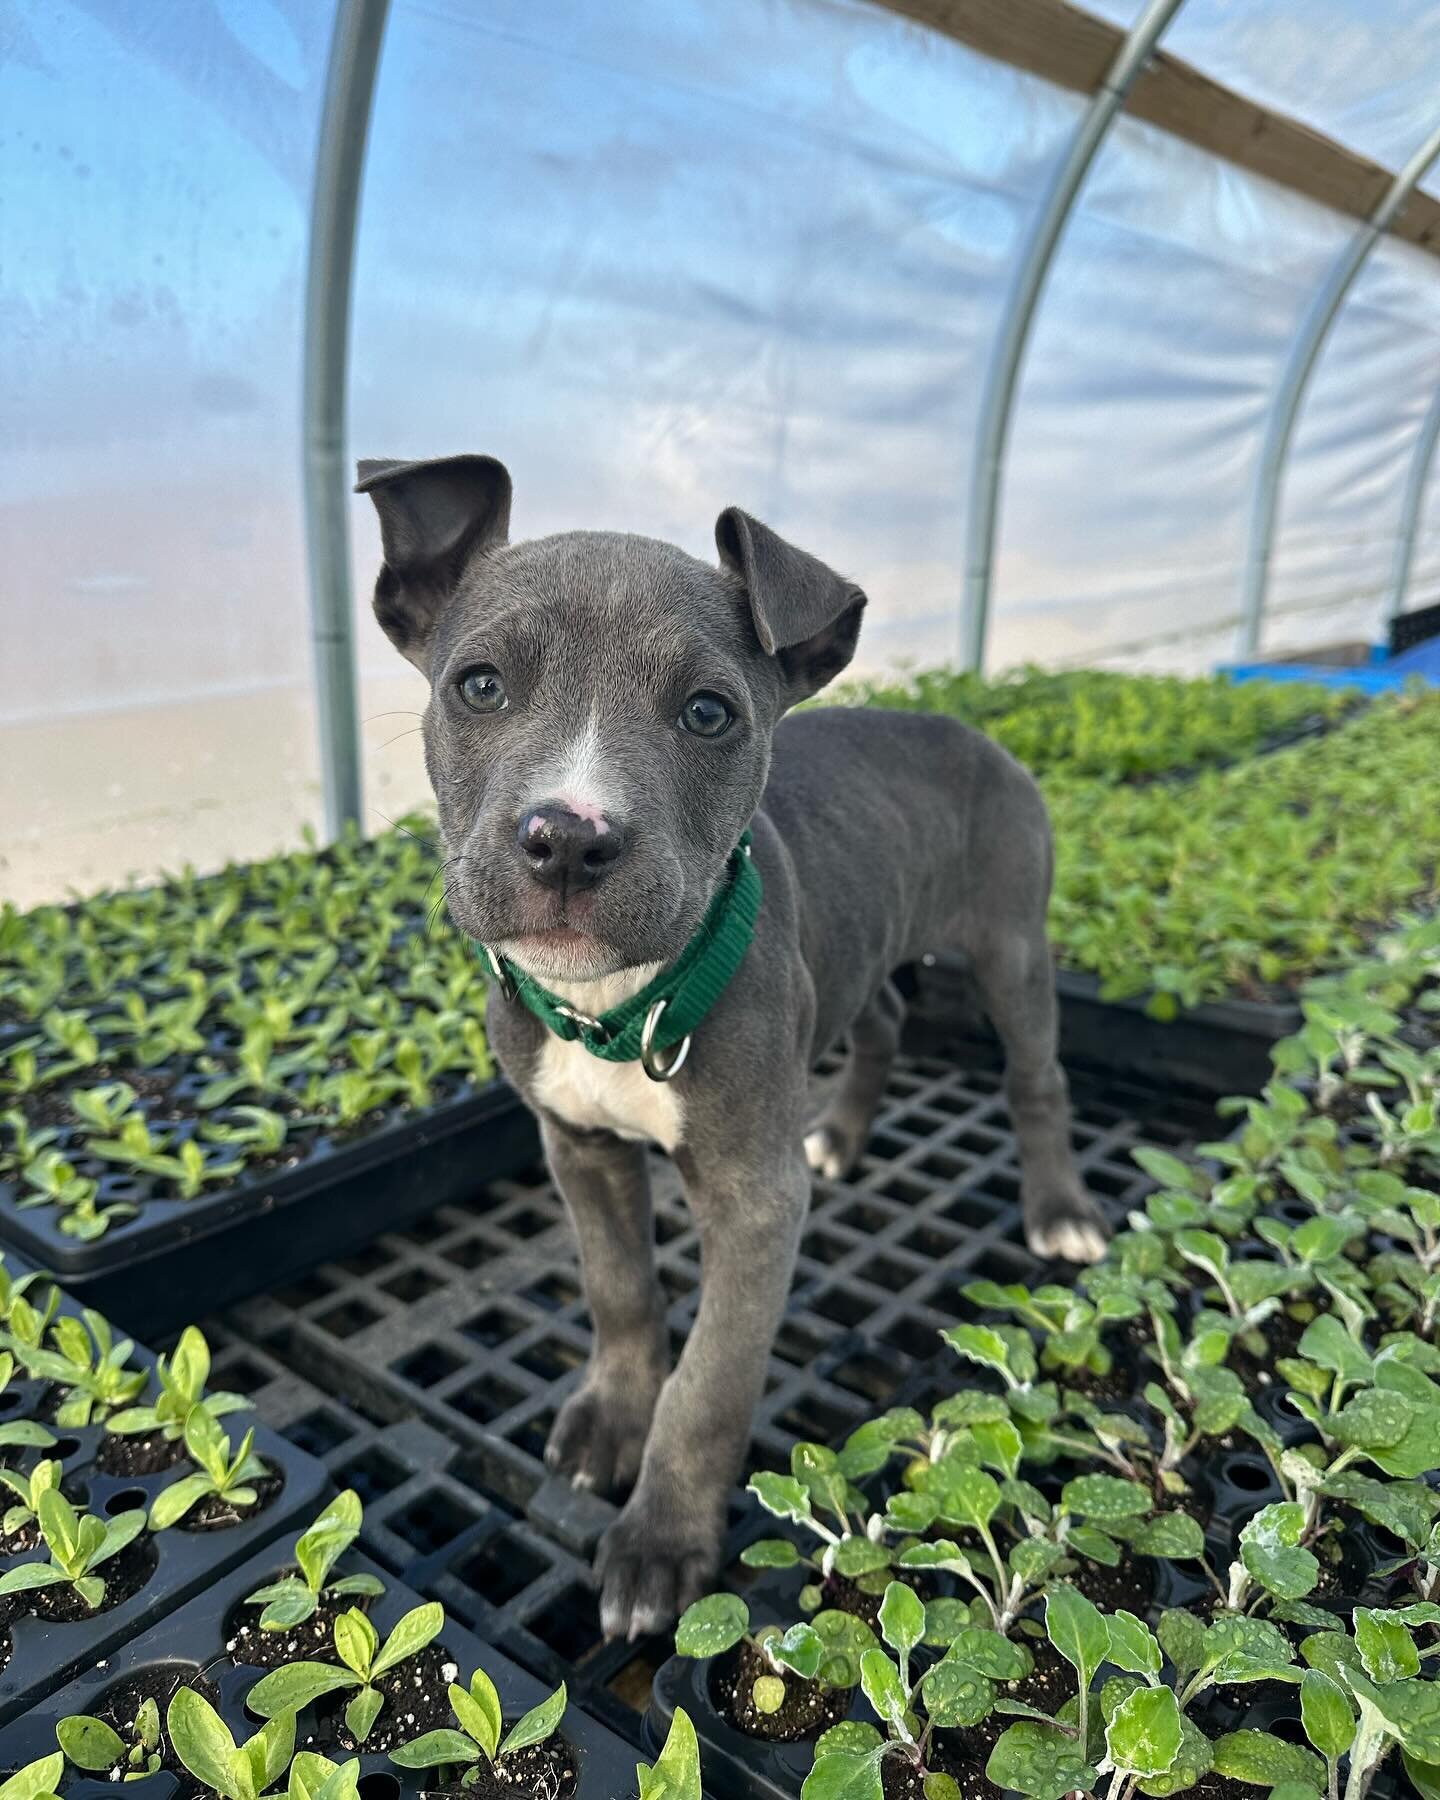 The greenhouse tables are full! And we are growing a new kind of seedling these days! Meet Poppy, the 10 week old pitbull, joining the farm team.

Thanks to @midcoasthumane for the work you do finding loving homes for furry friends and to @sparkbagel